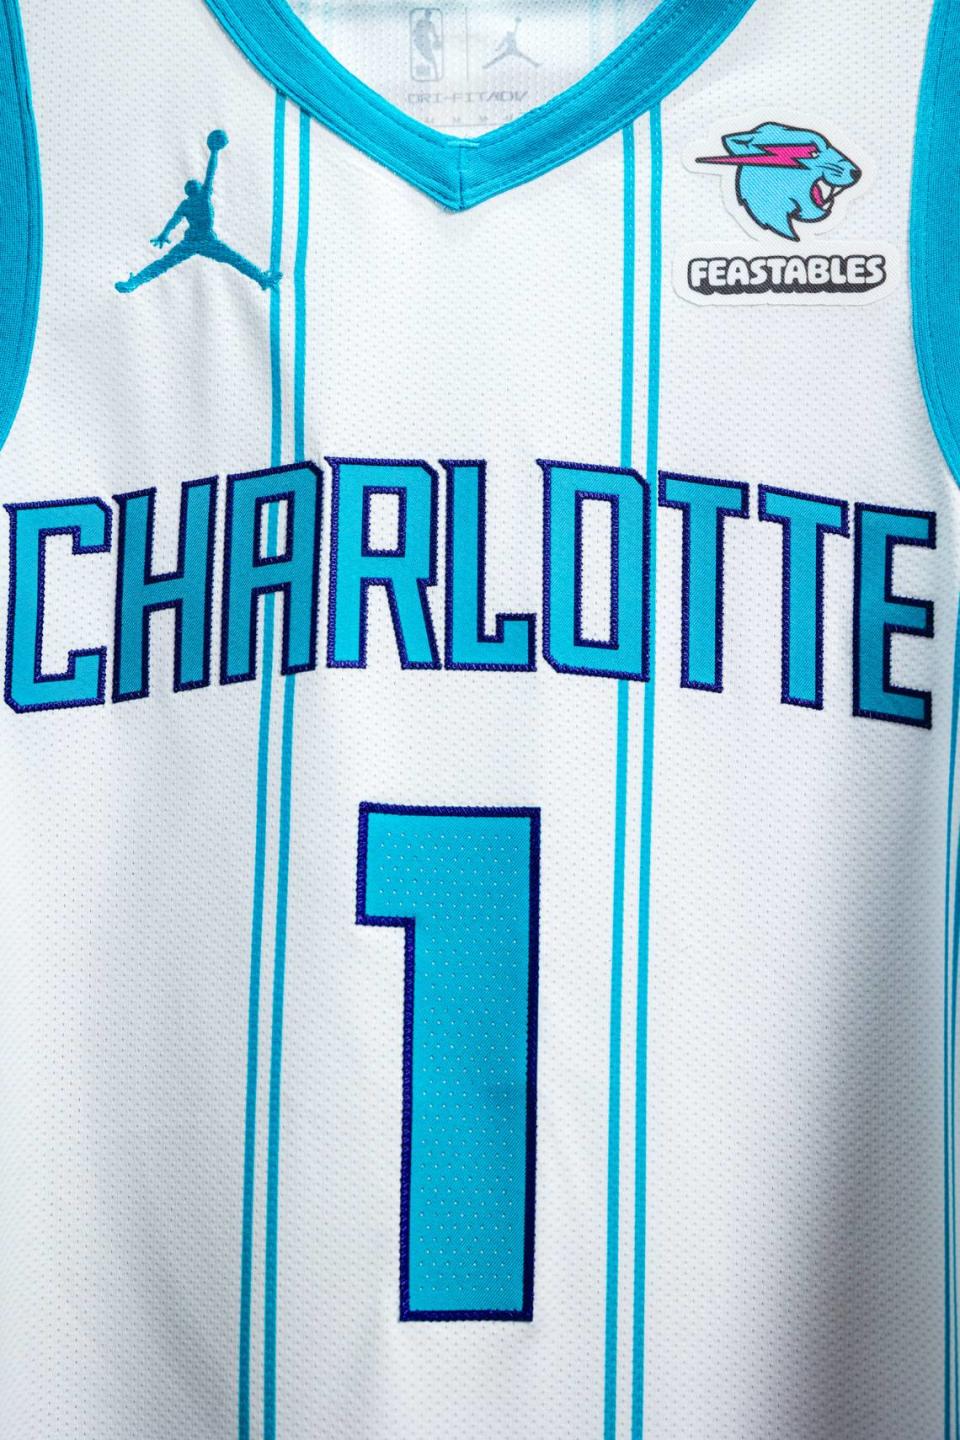 An image of the Charlotte Hornets’ jersey with their new patch sponsorship. The deal marks the first partnership between a creator-led brand and an NBA franchise. Charlotte Hornets photo/Charlotte Hornets photo